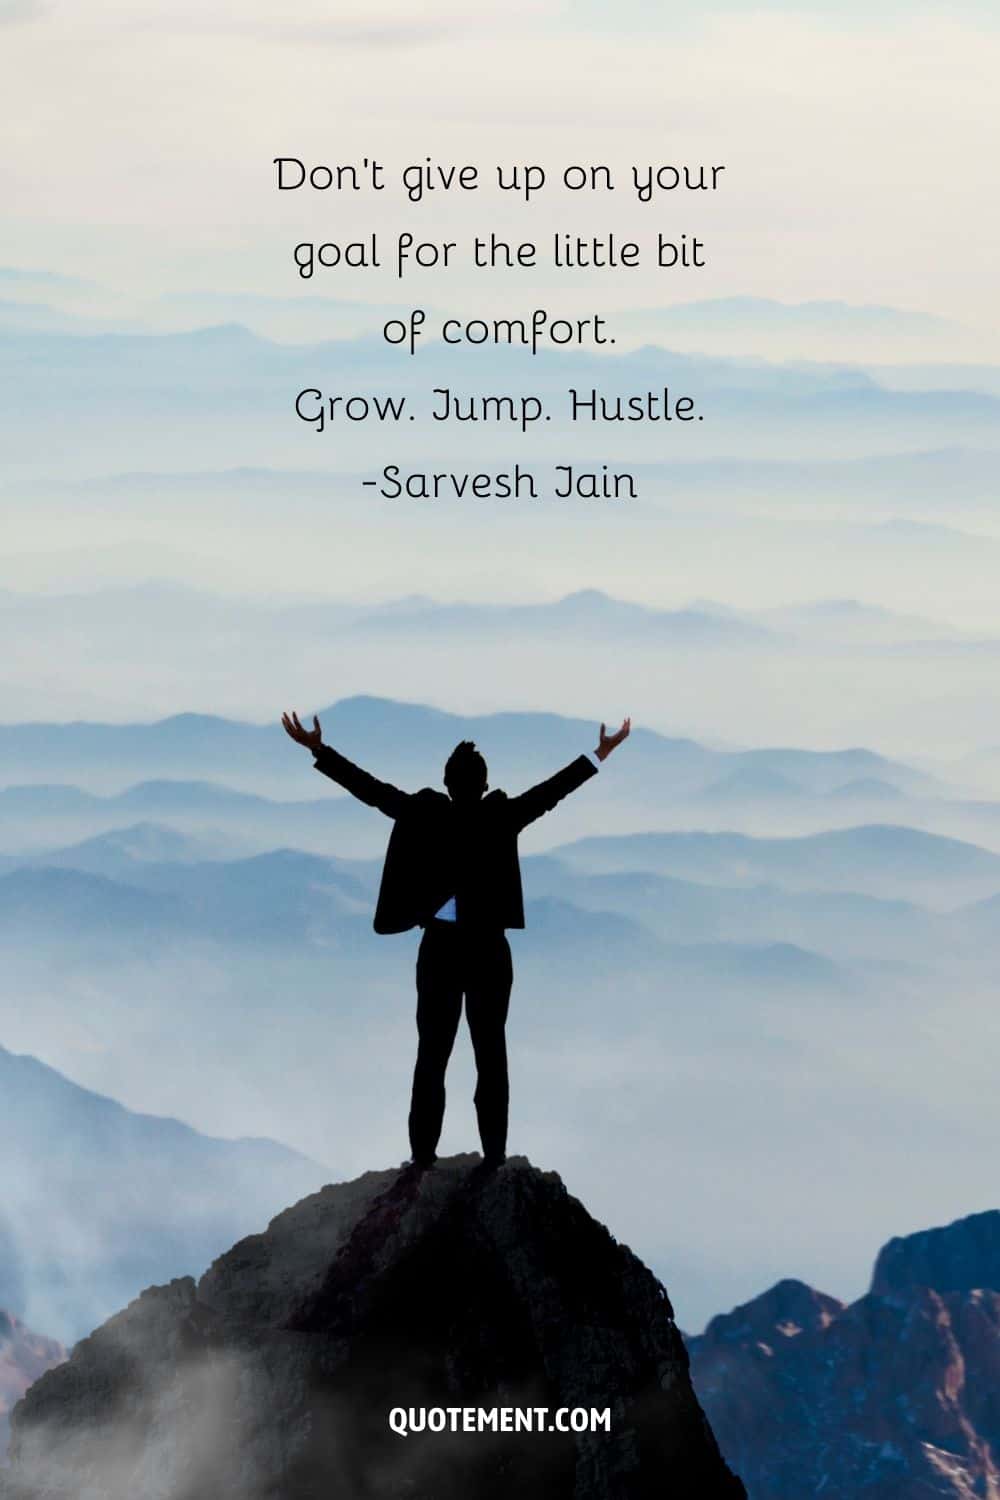 a man on mountain top image representing brilliant hustle quote